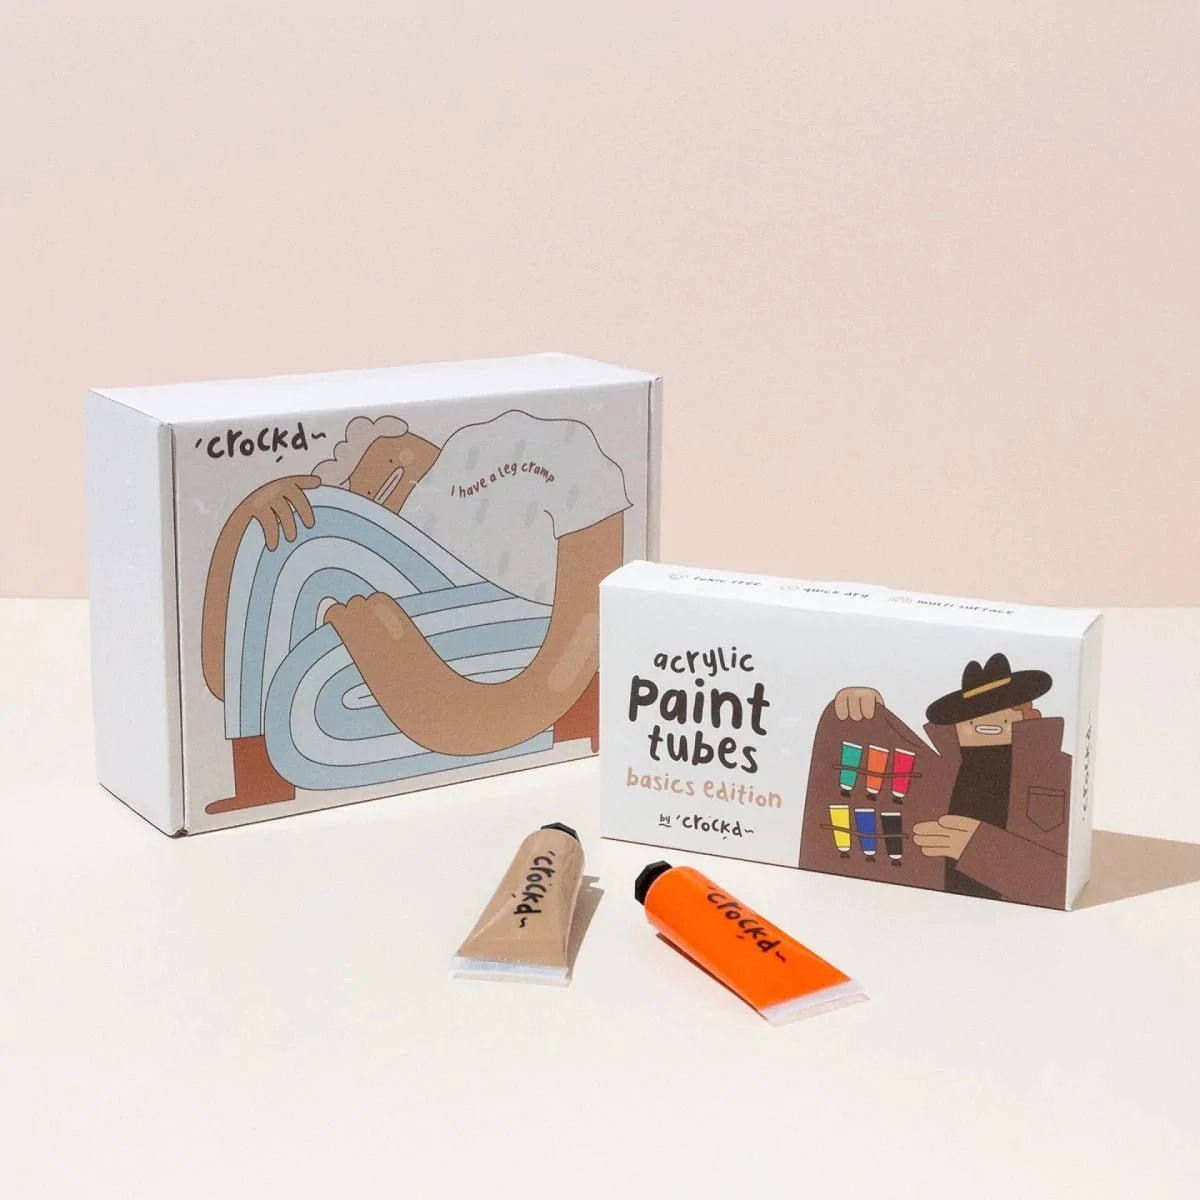 A bundle shot of the group pottery kit and paint kit